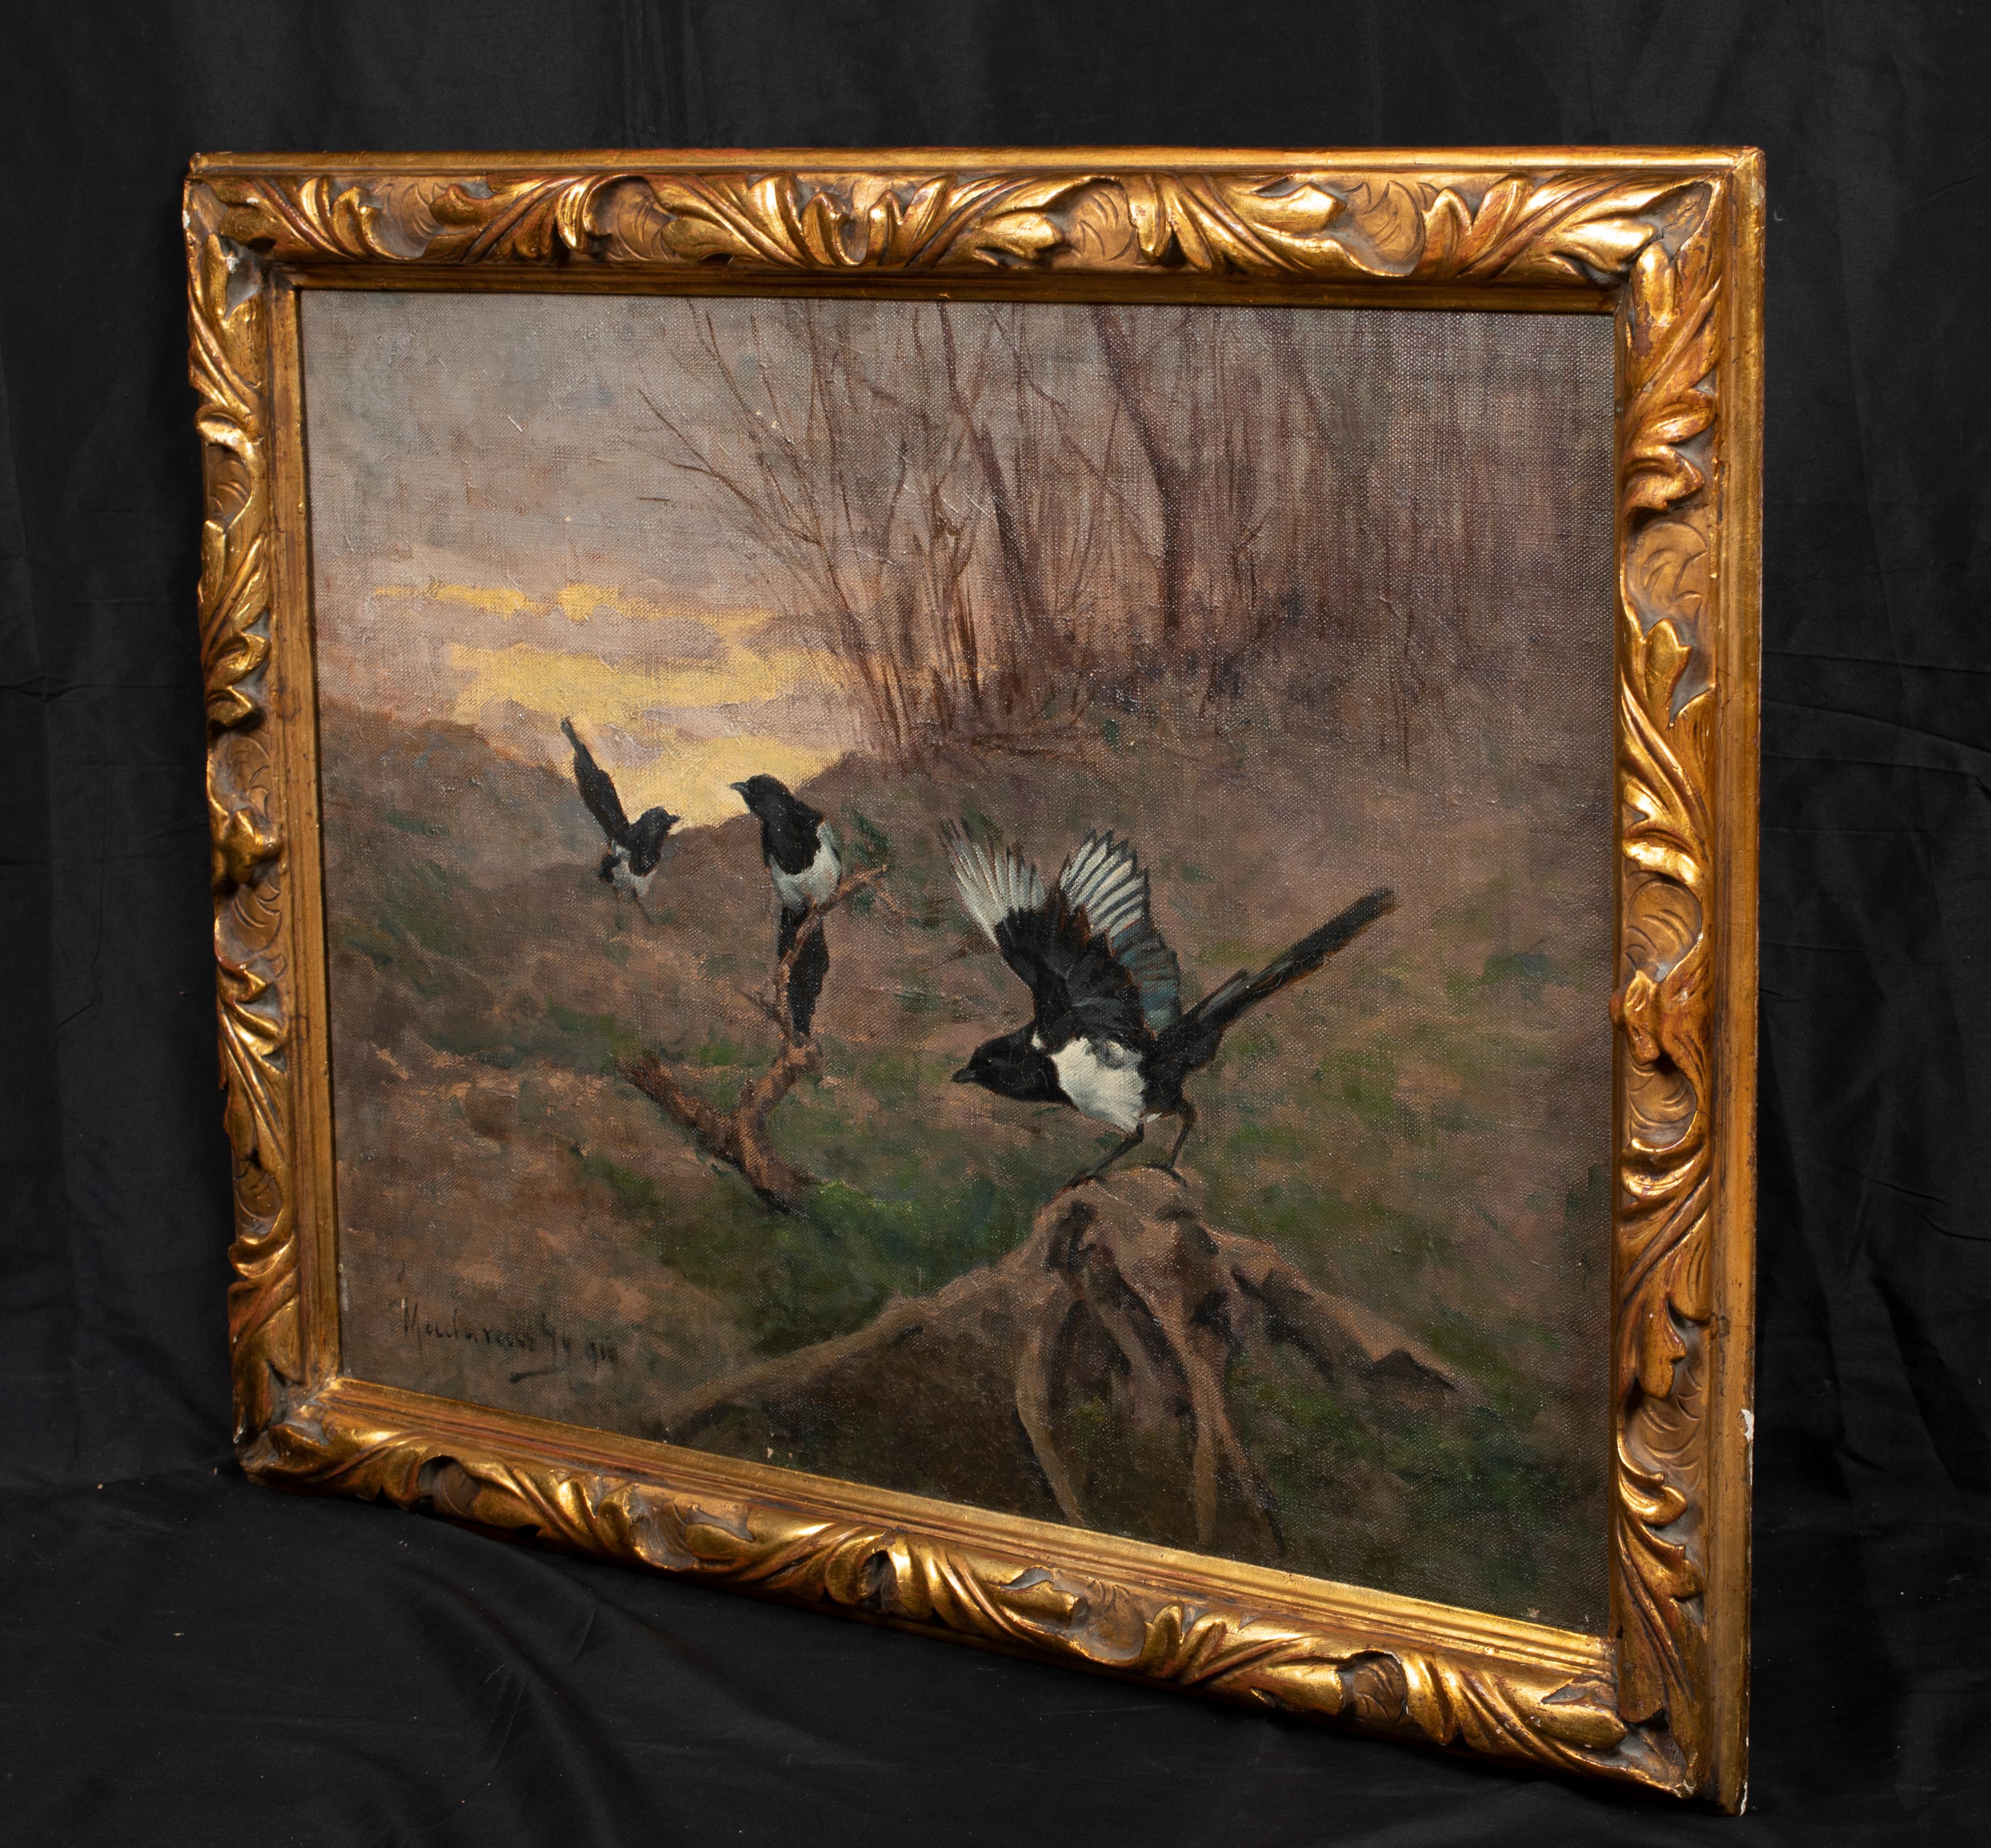 Study Of Magpies In A Landscape, circa 1900 - Brown Portrait Painting by Unknown